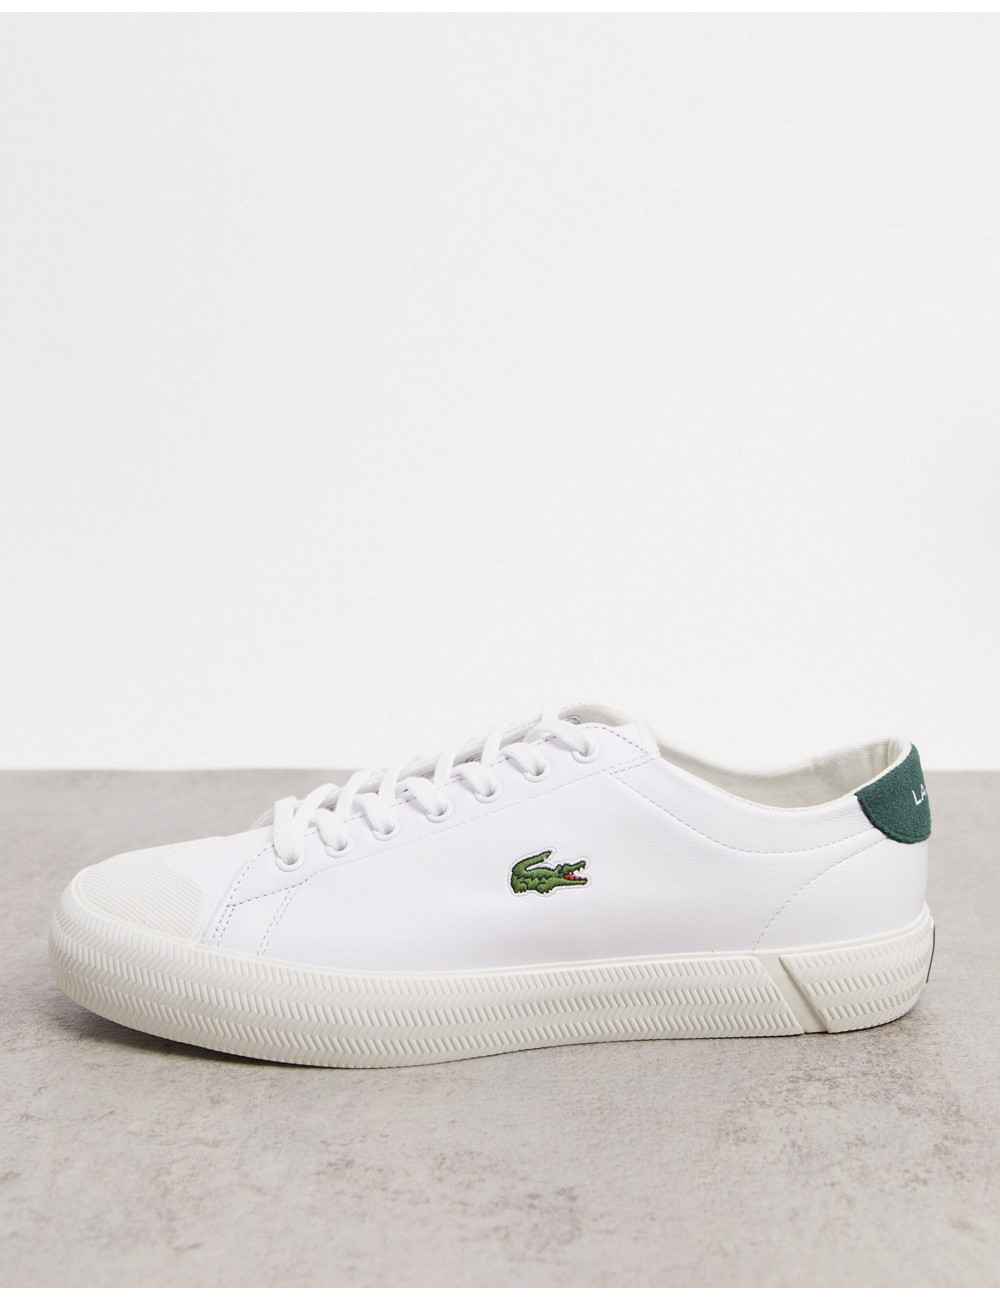 Lacoste gripshot trainers...